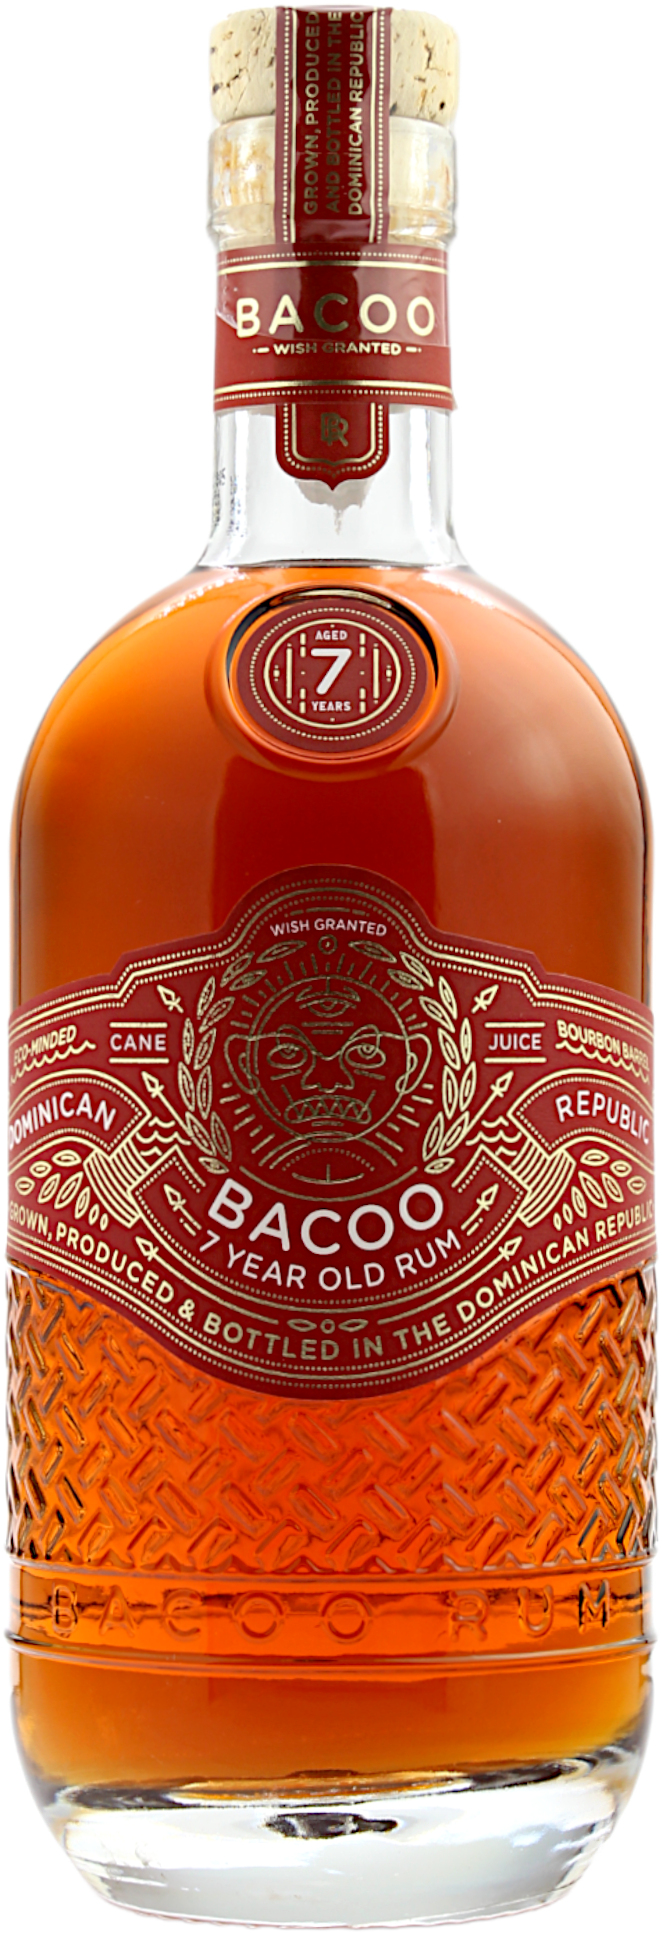 Bacoo Rum 7 Jahre 40.0% 0,7l